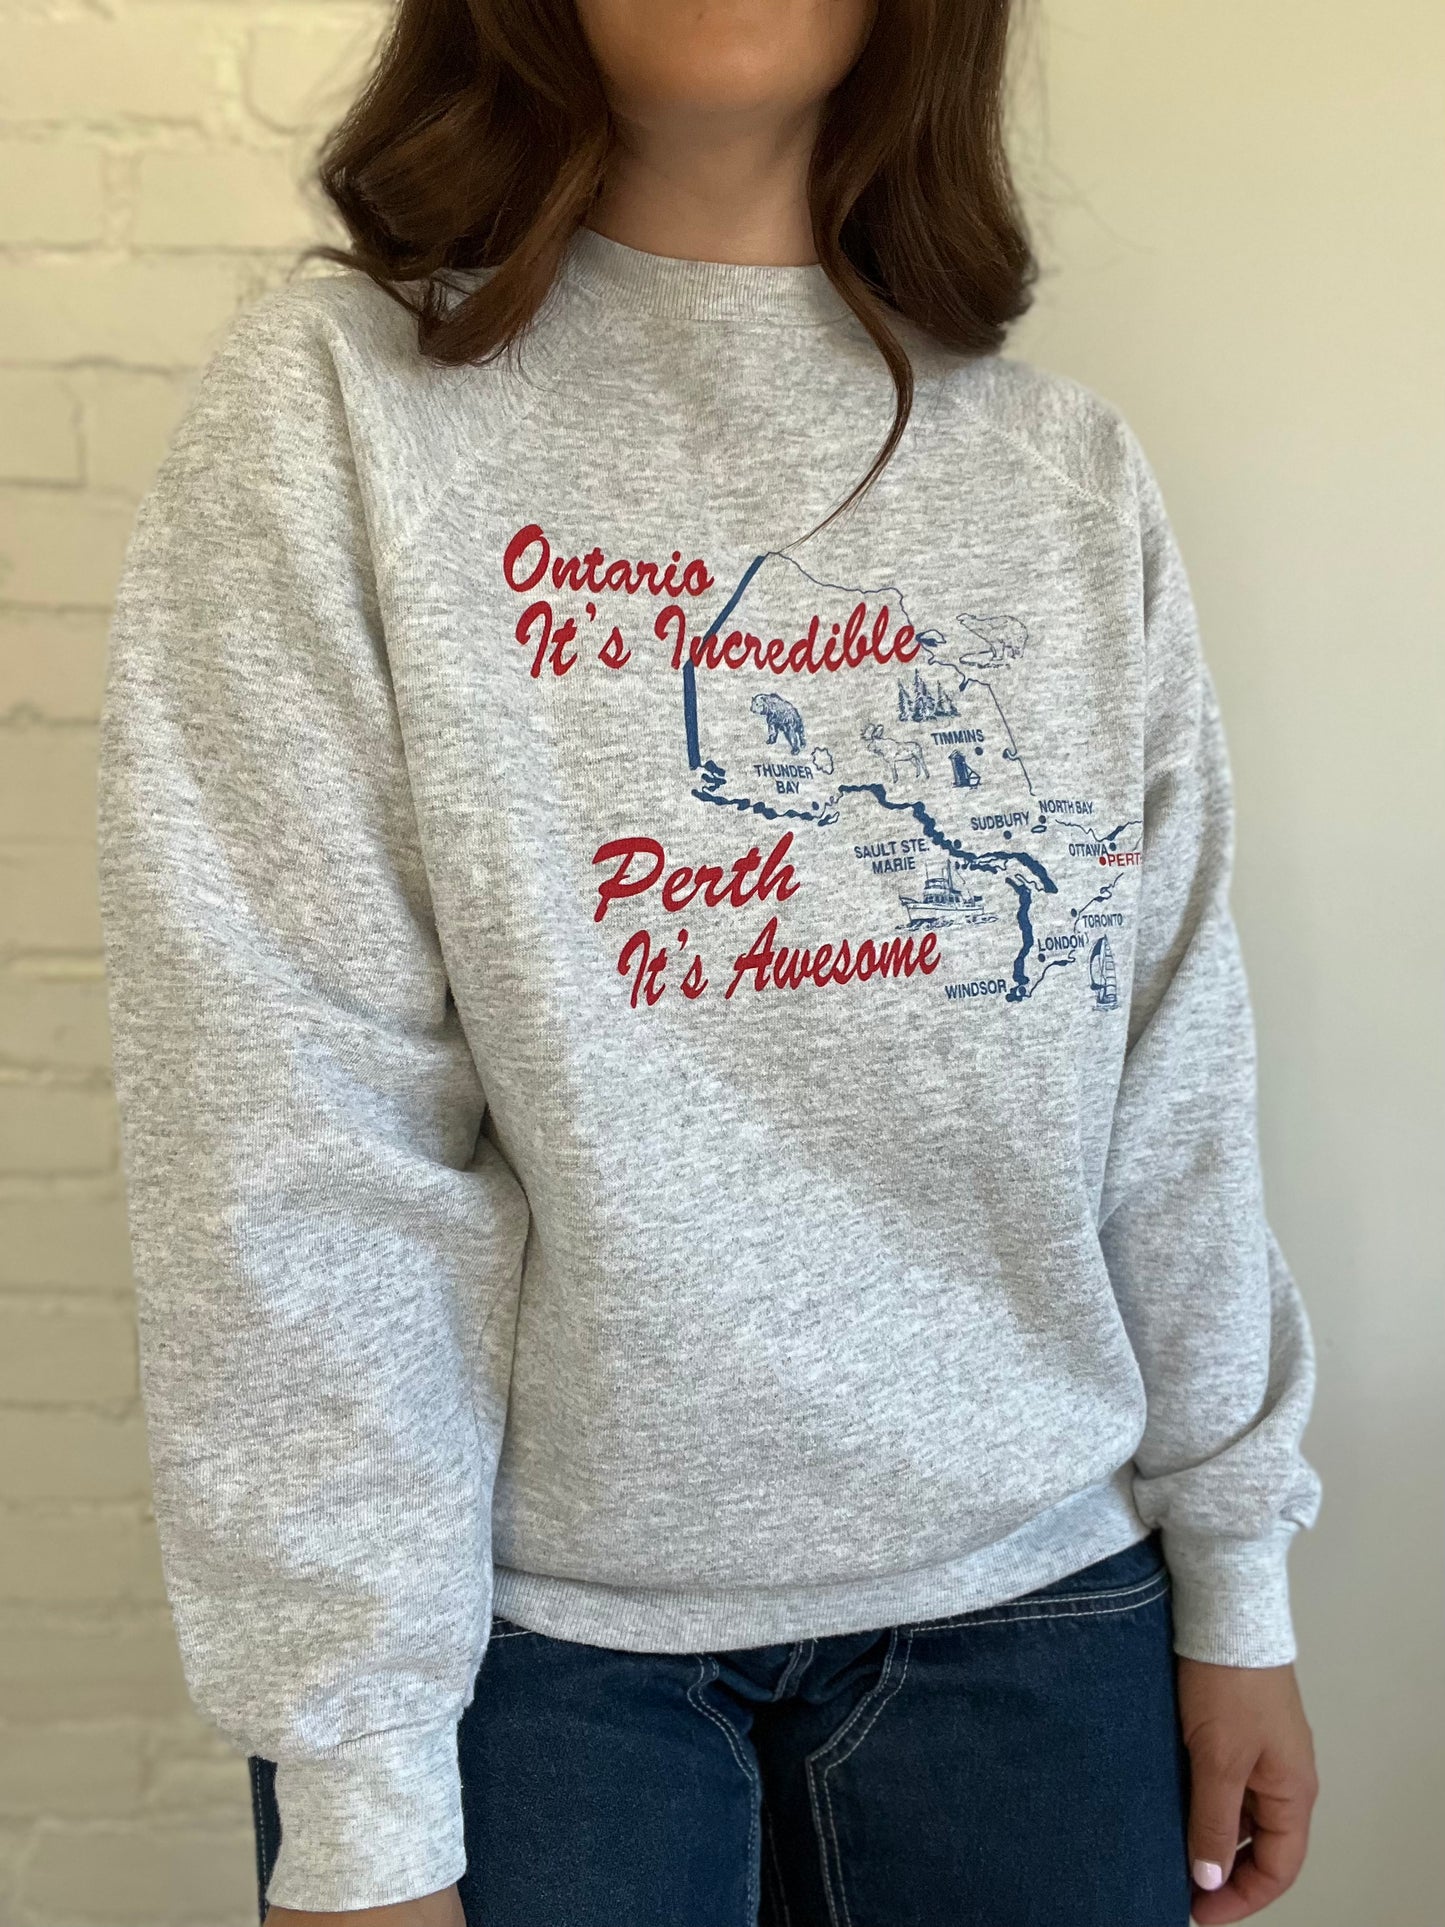 Perth It's Awesome Ontario Sweater - XL